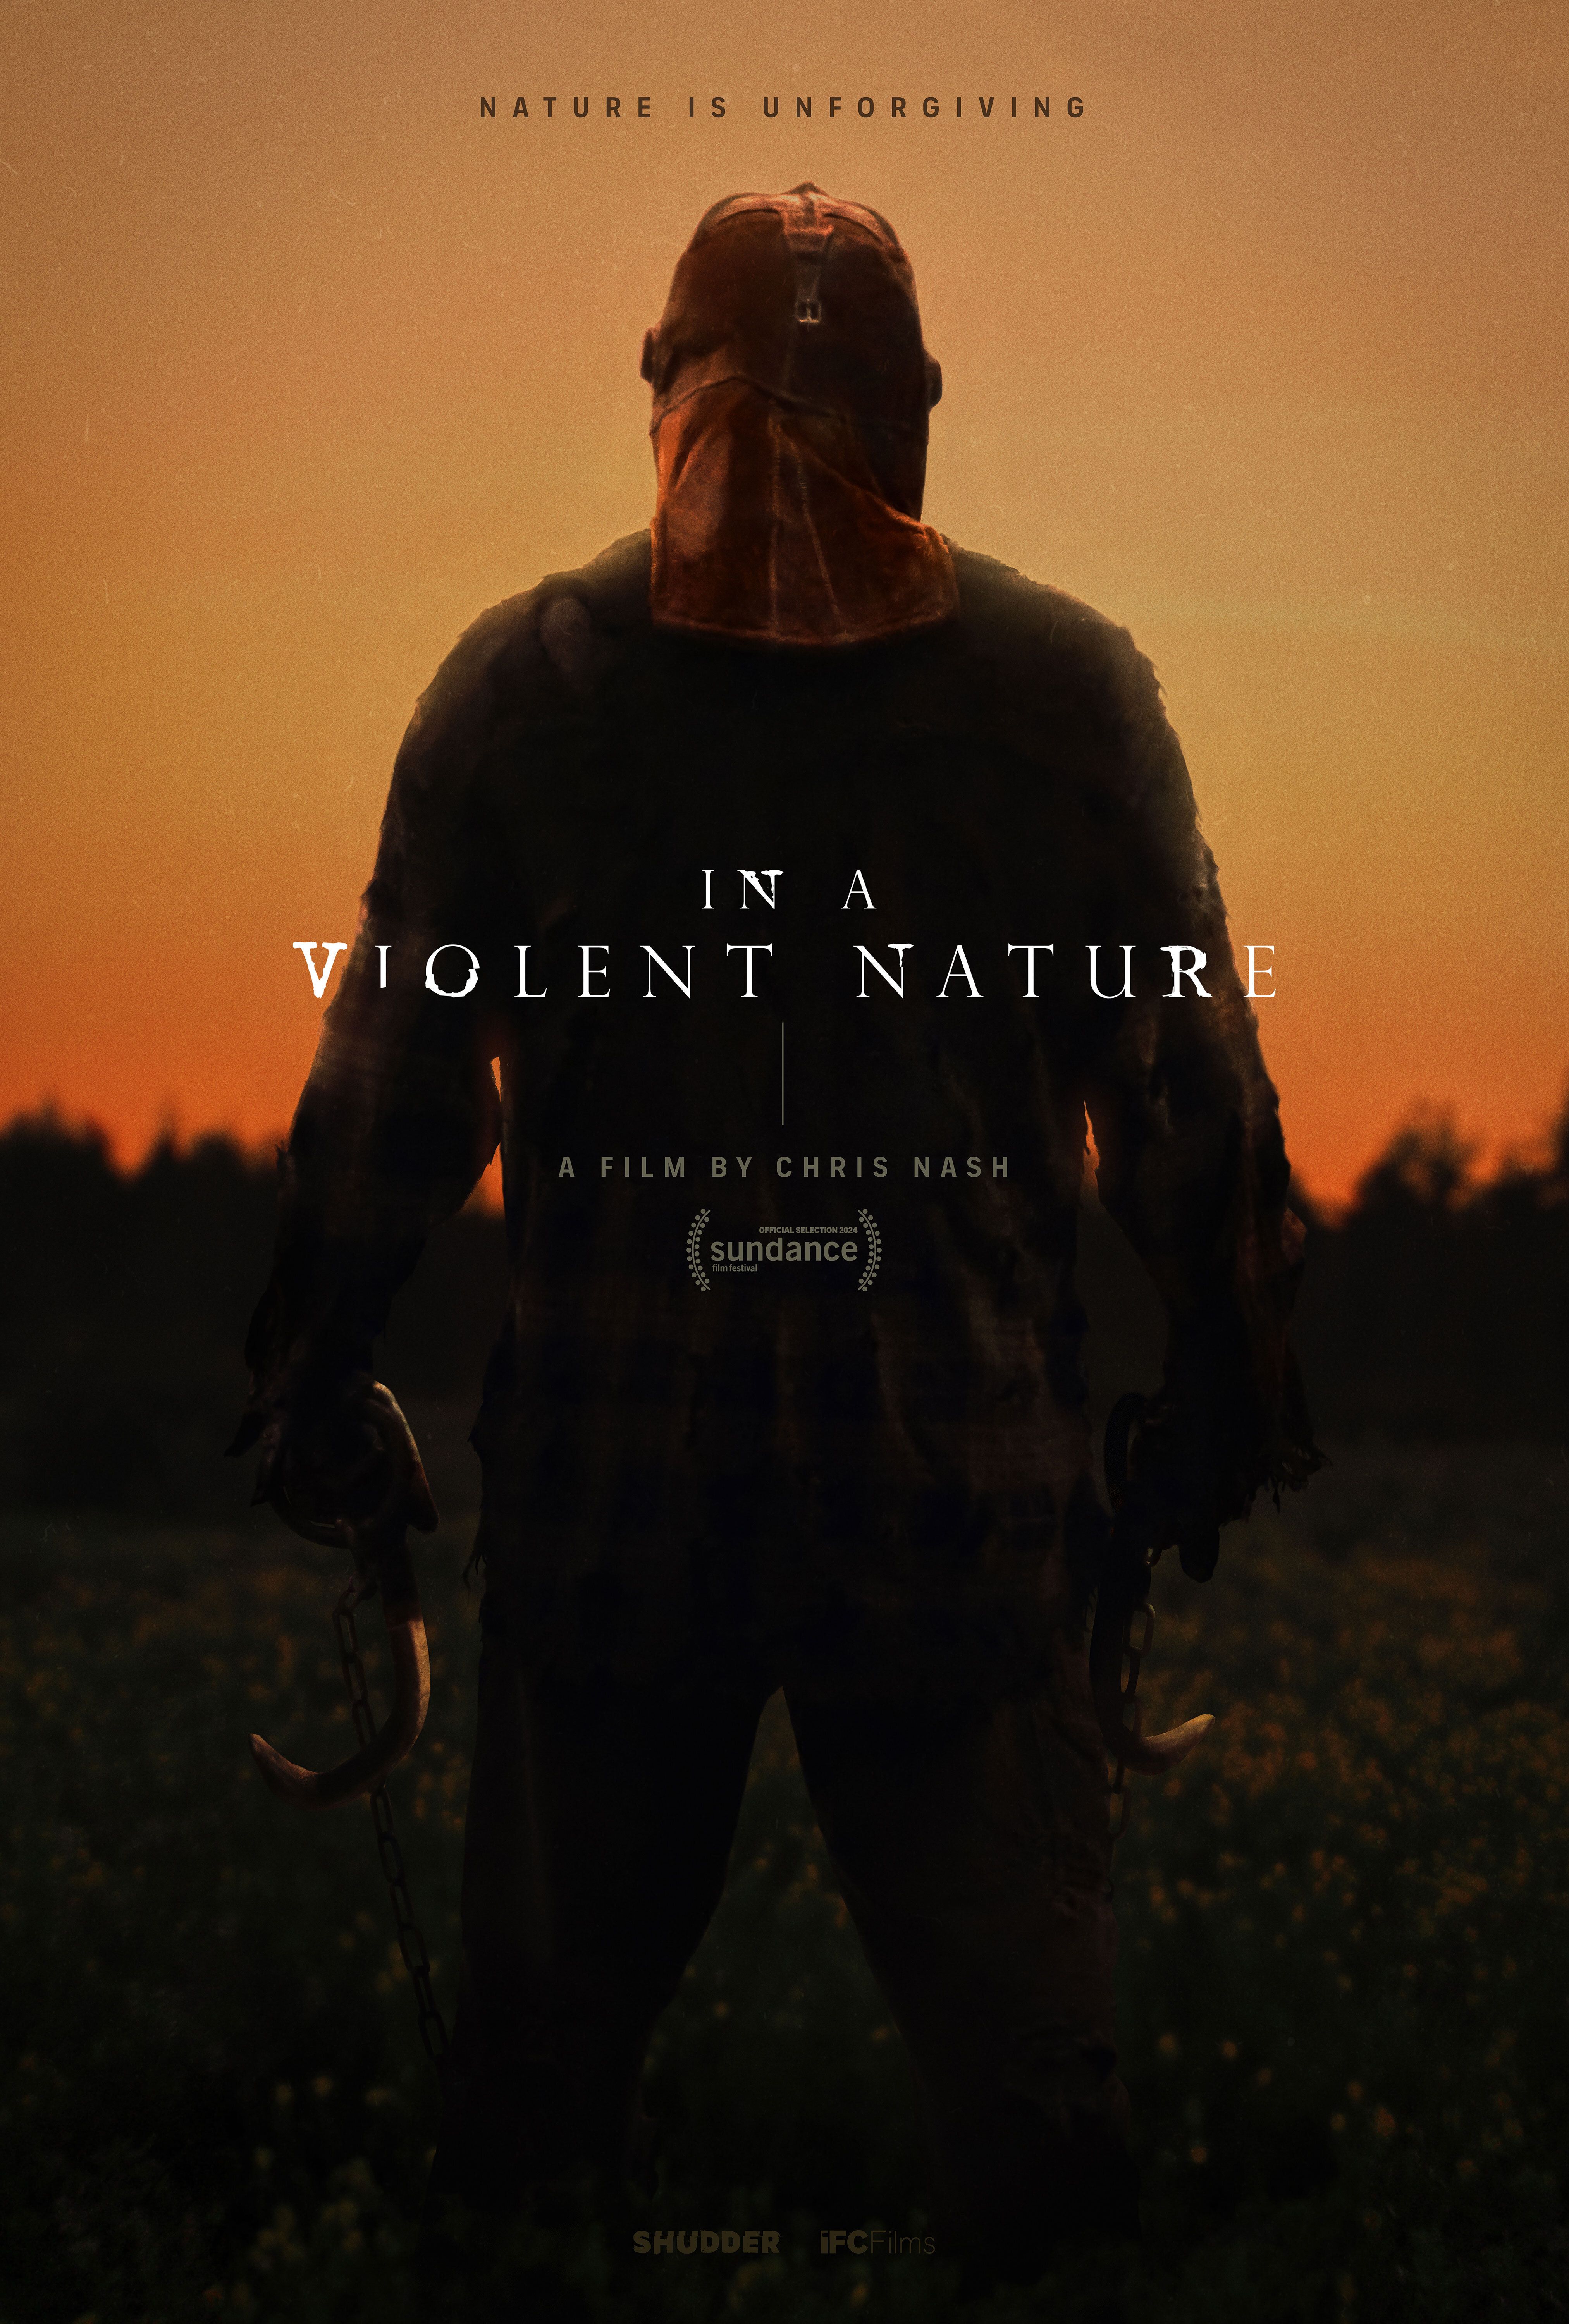 Chris Nash's new slasher, Johnny, stands in front of sunset in a poster for 'In a Violent Nature'